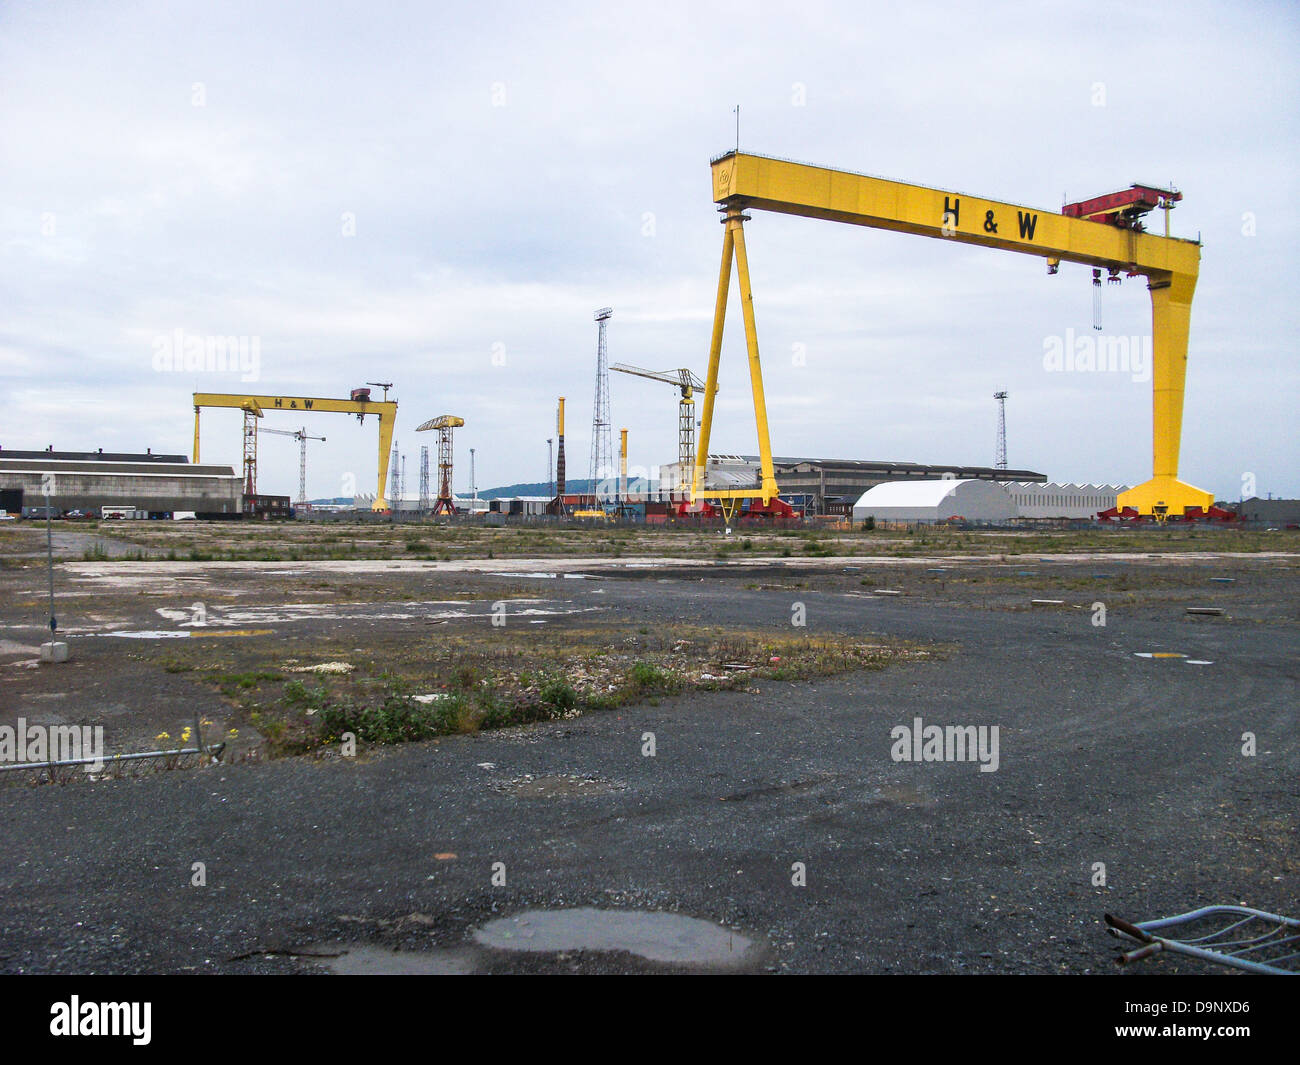 Demonstrating the desolation of the former Harland & Wolff shipyard.  Once the hub of the Belfast shipbuilding industry. Stock Photo